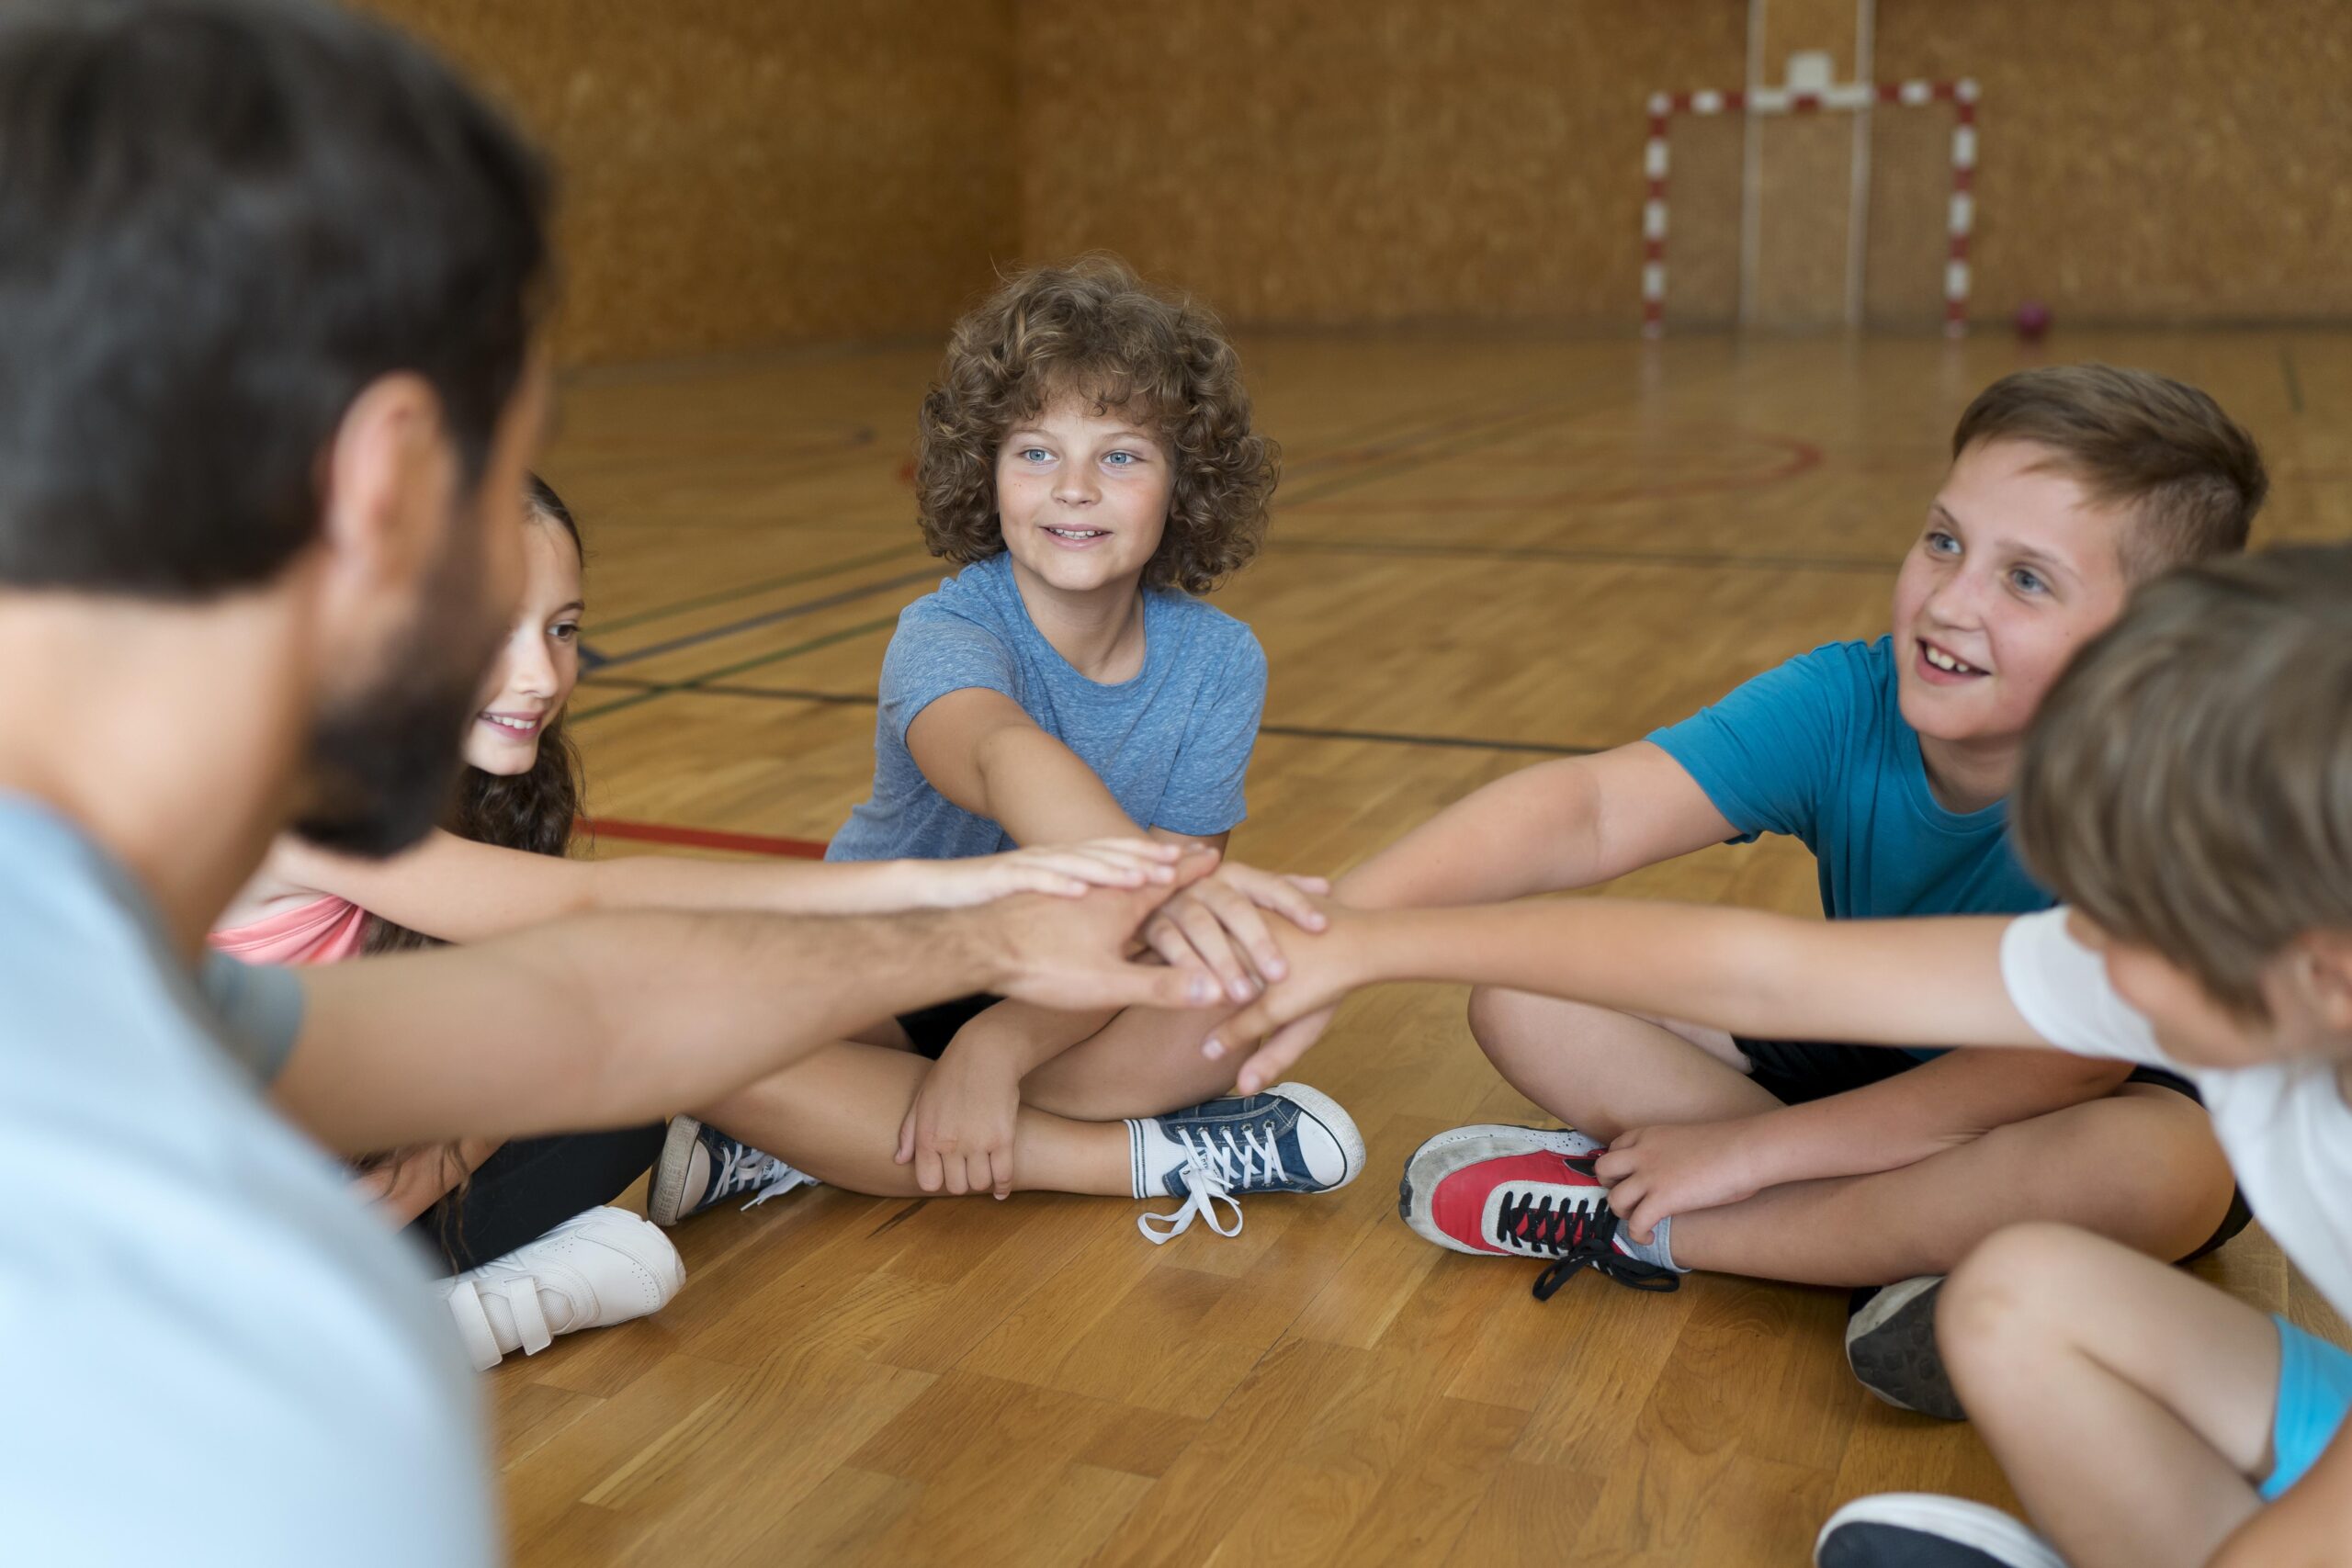 How Can Parents Ensure Their Child’s Safety in Sports Leagues?